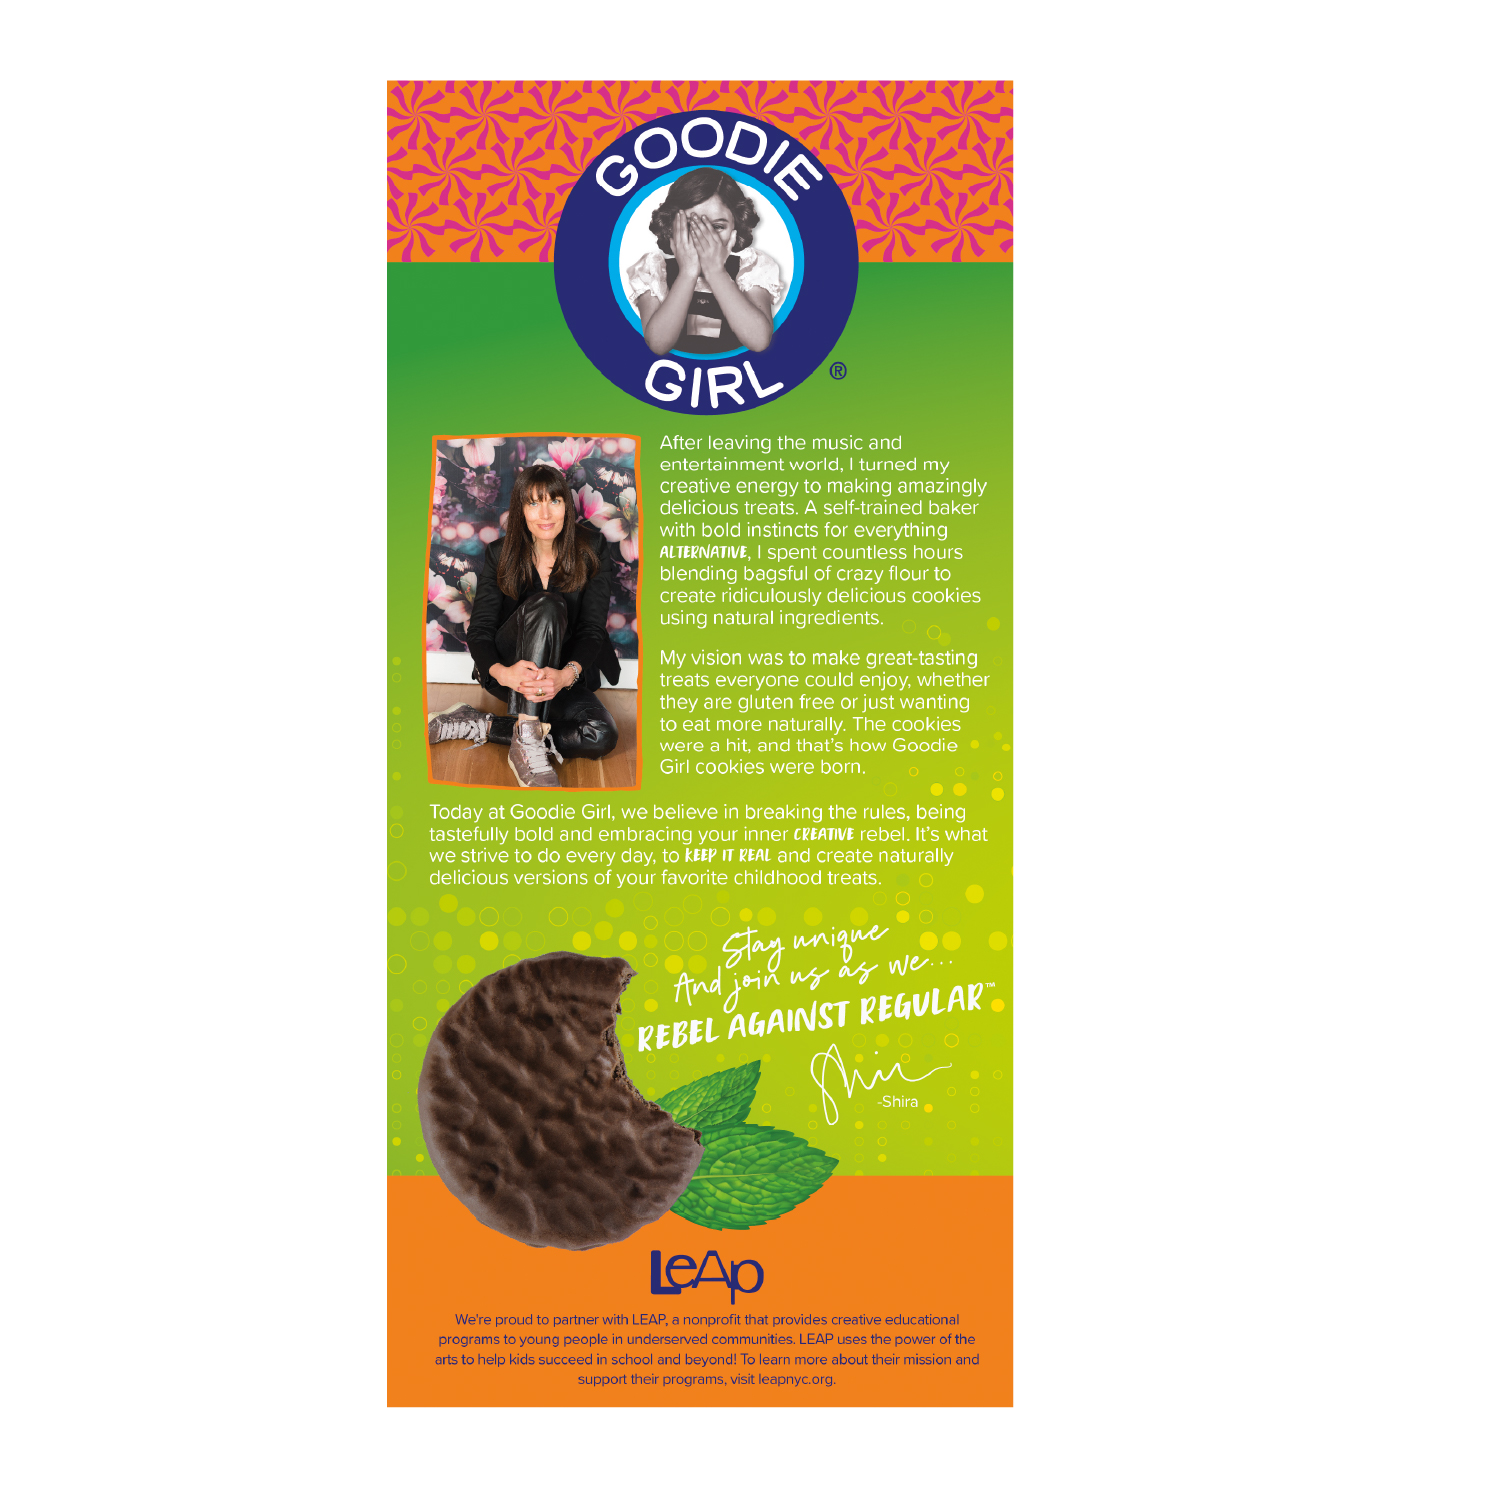 Goodie Girl Mint Cookies, Gluten Free, Shelf Stable, 7 oz Box - image 5 of 10